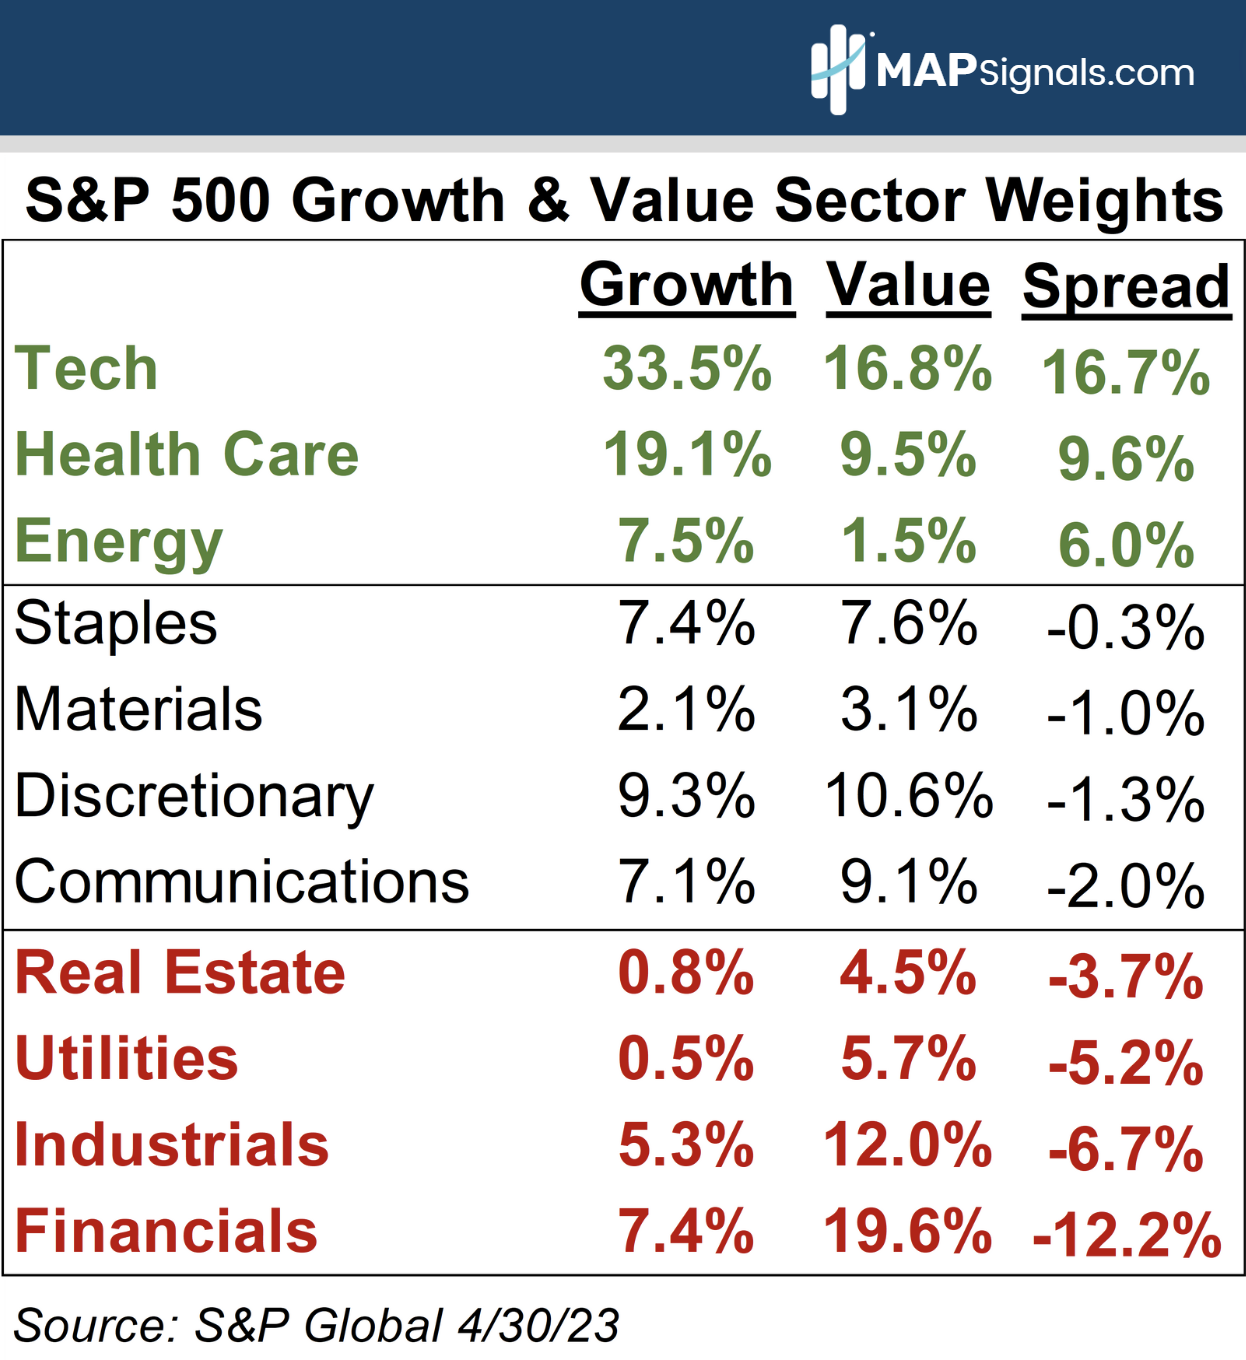 S&P 500 Growth & Value Sector Weights | MAPsignals